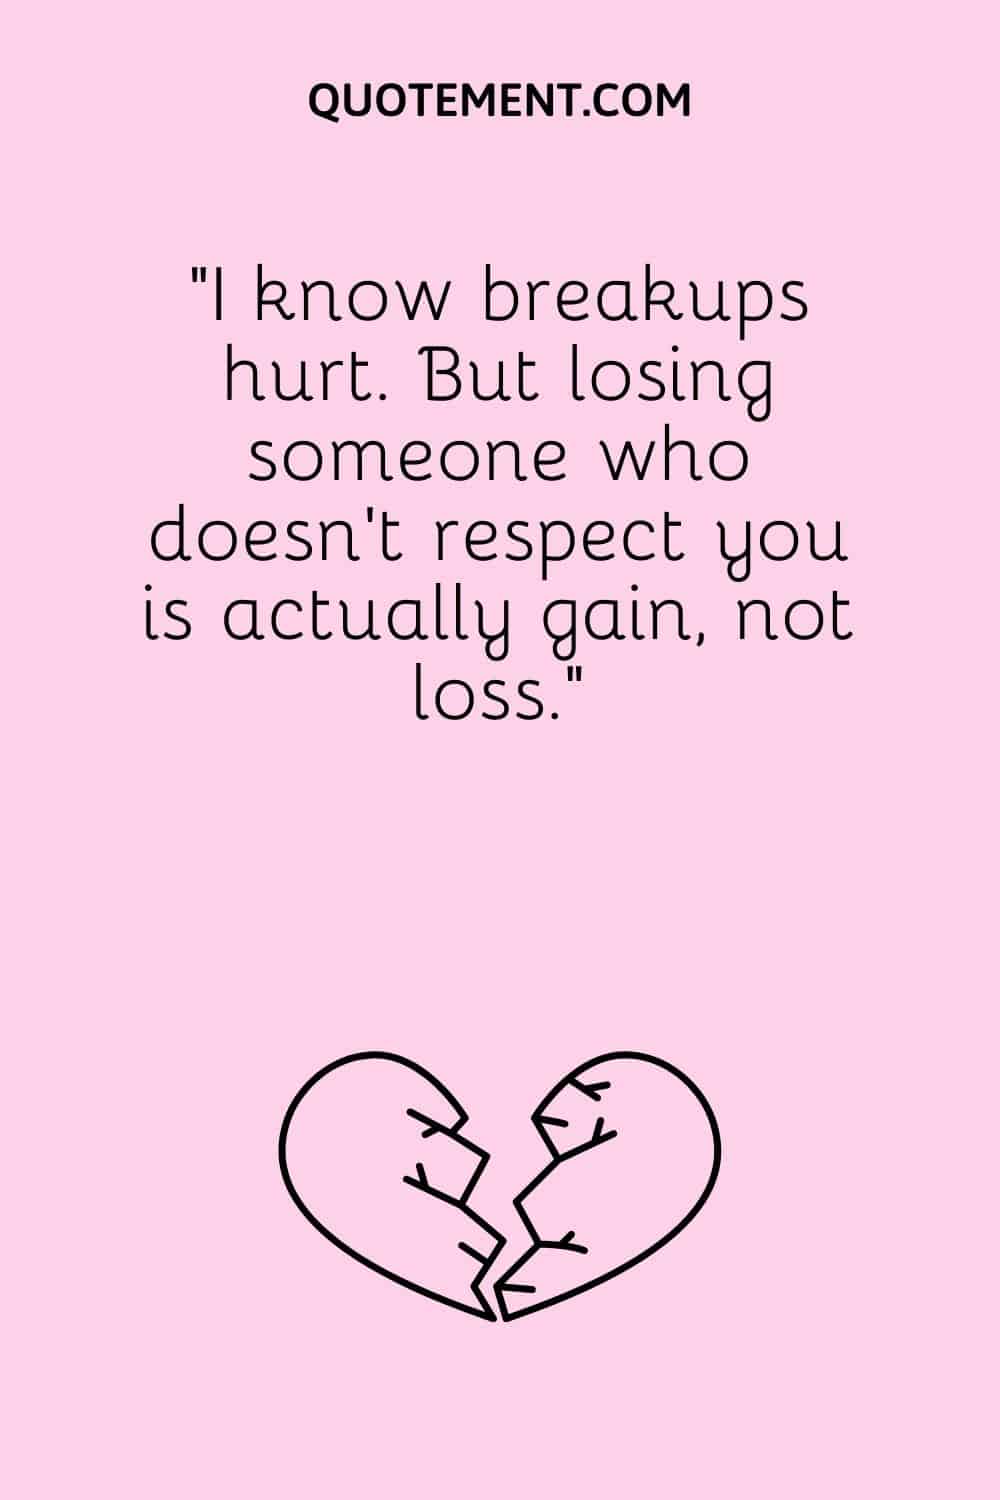 “I know breakups hurt. But losing someone who doesn’t respect you is actually gain, not loss.”